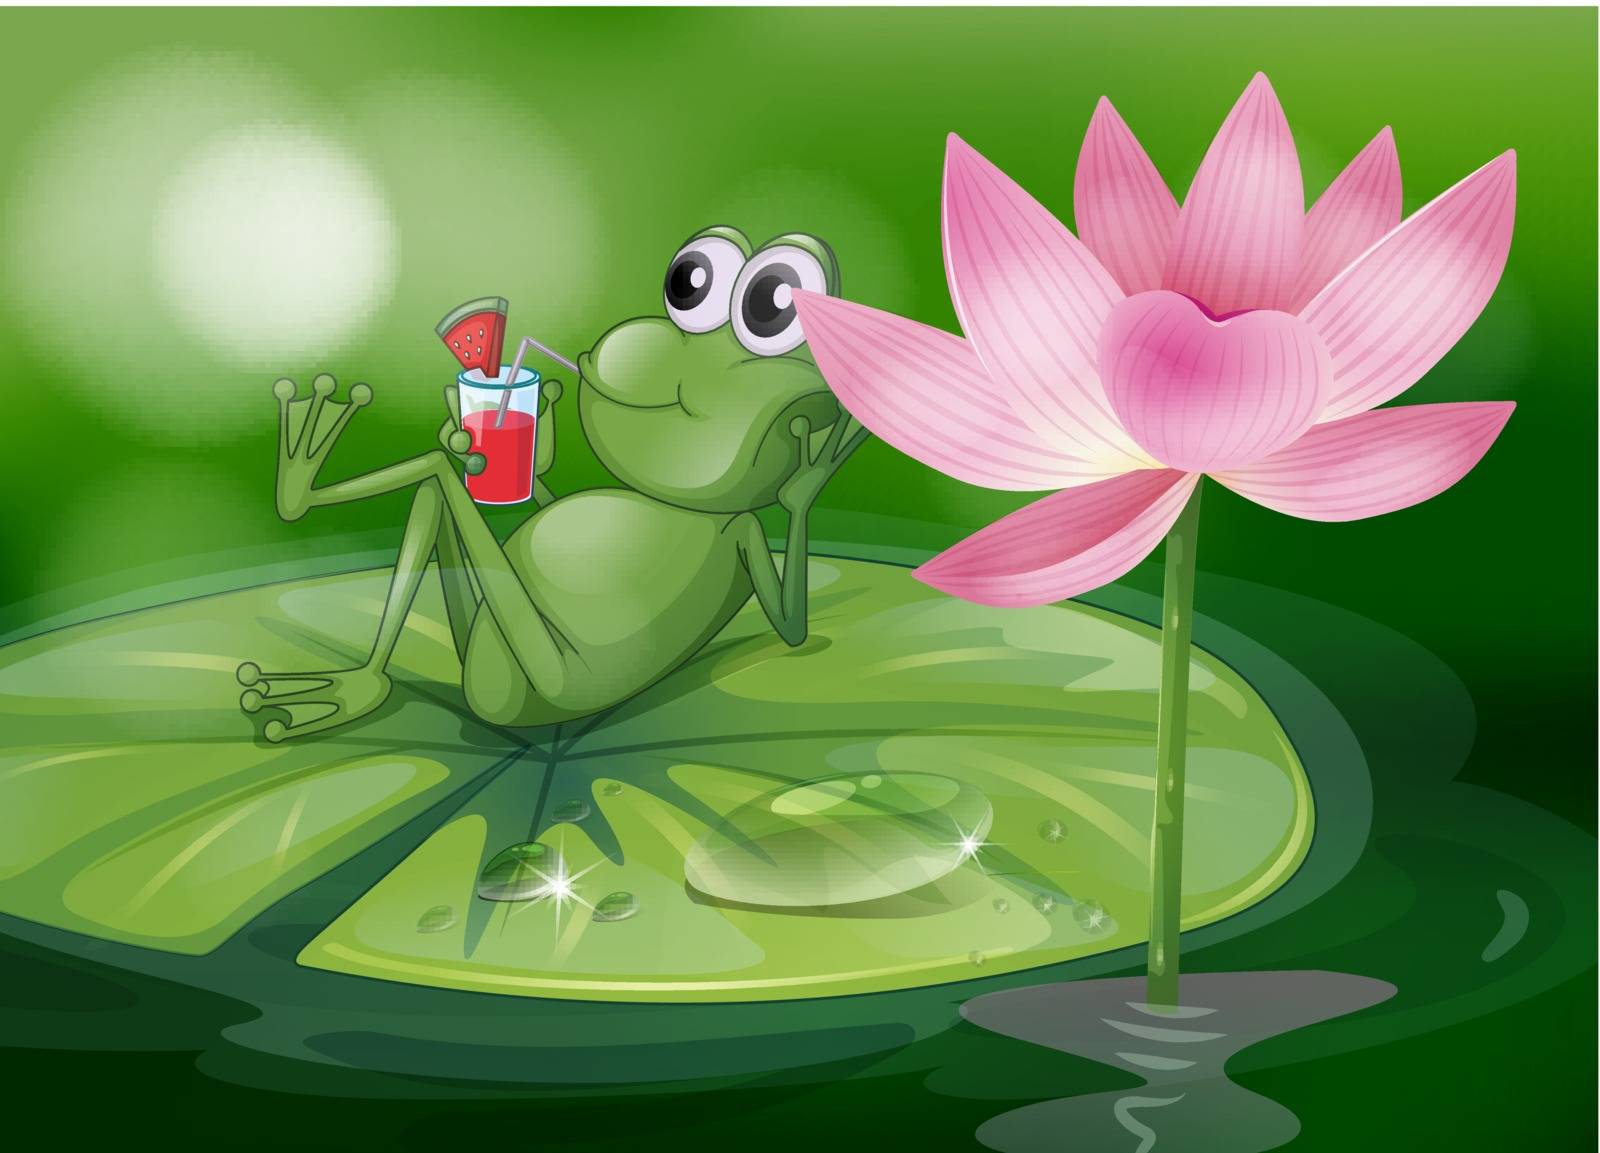 Illustration of a frog above the waterlily